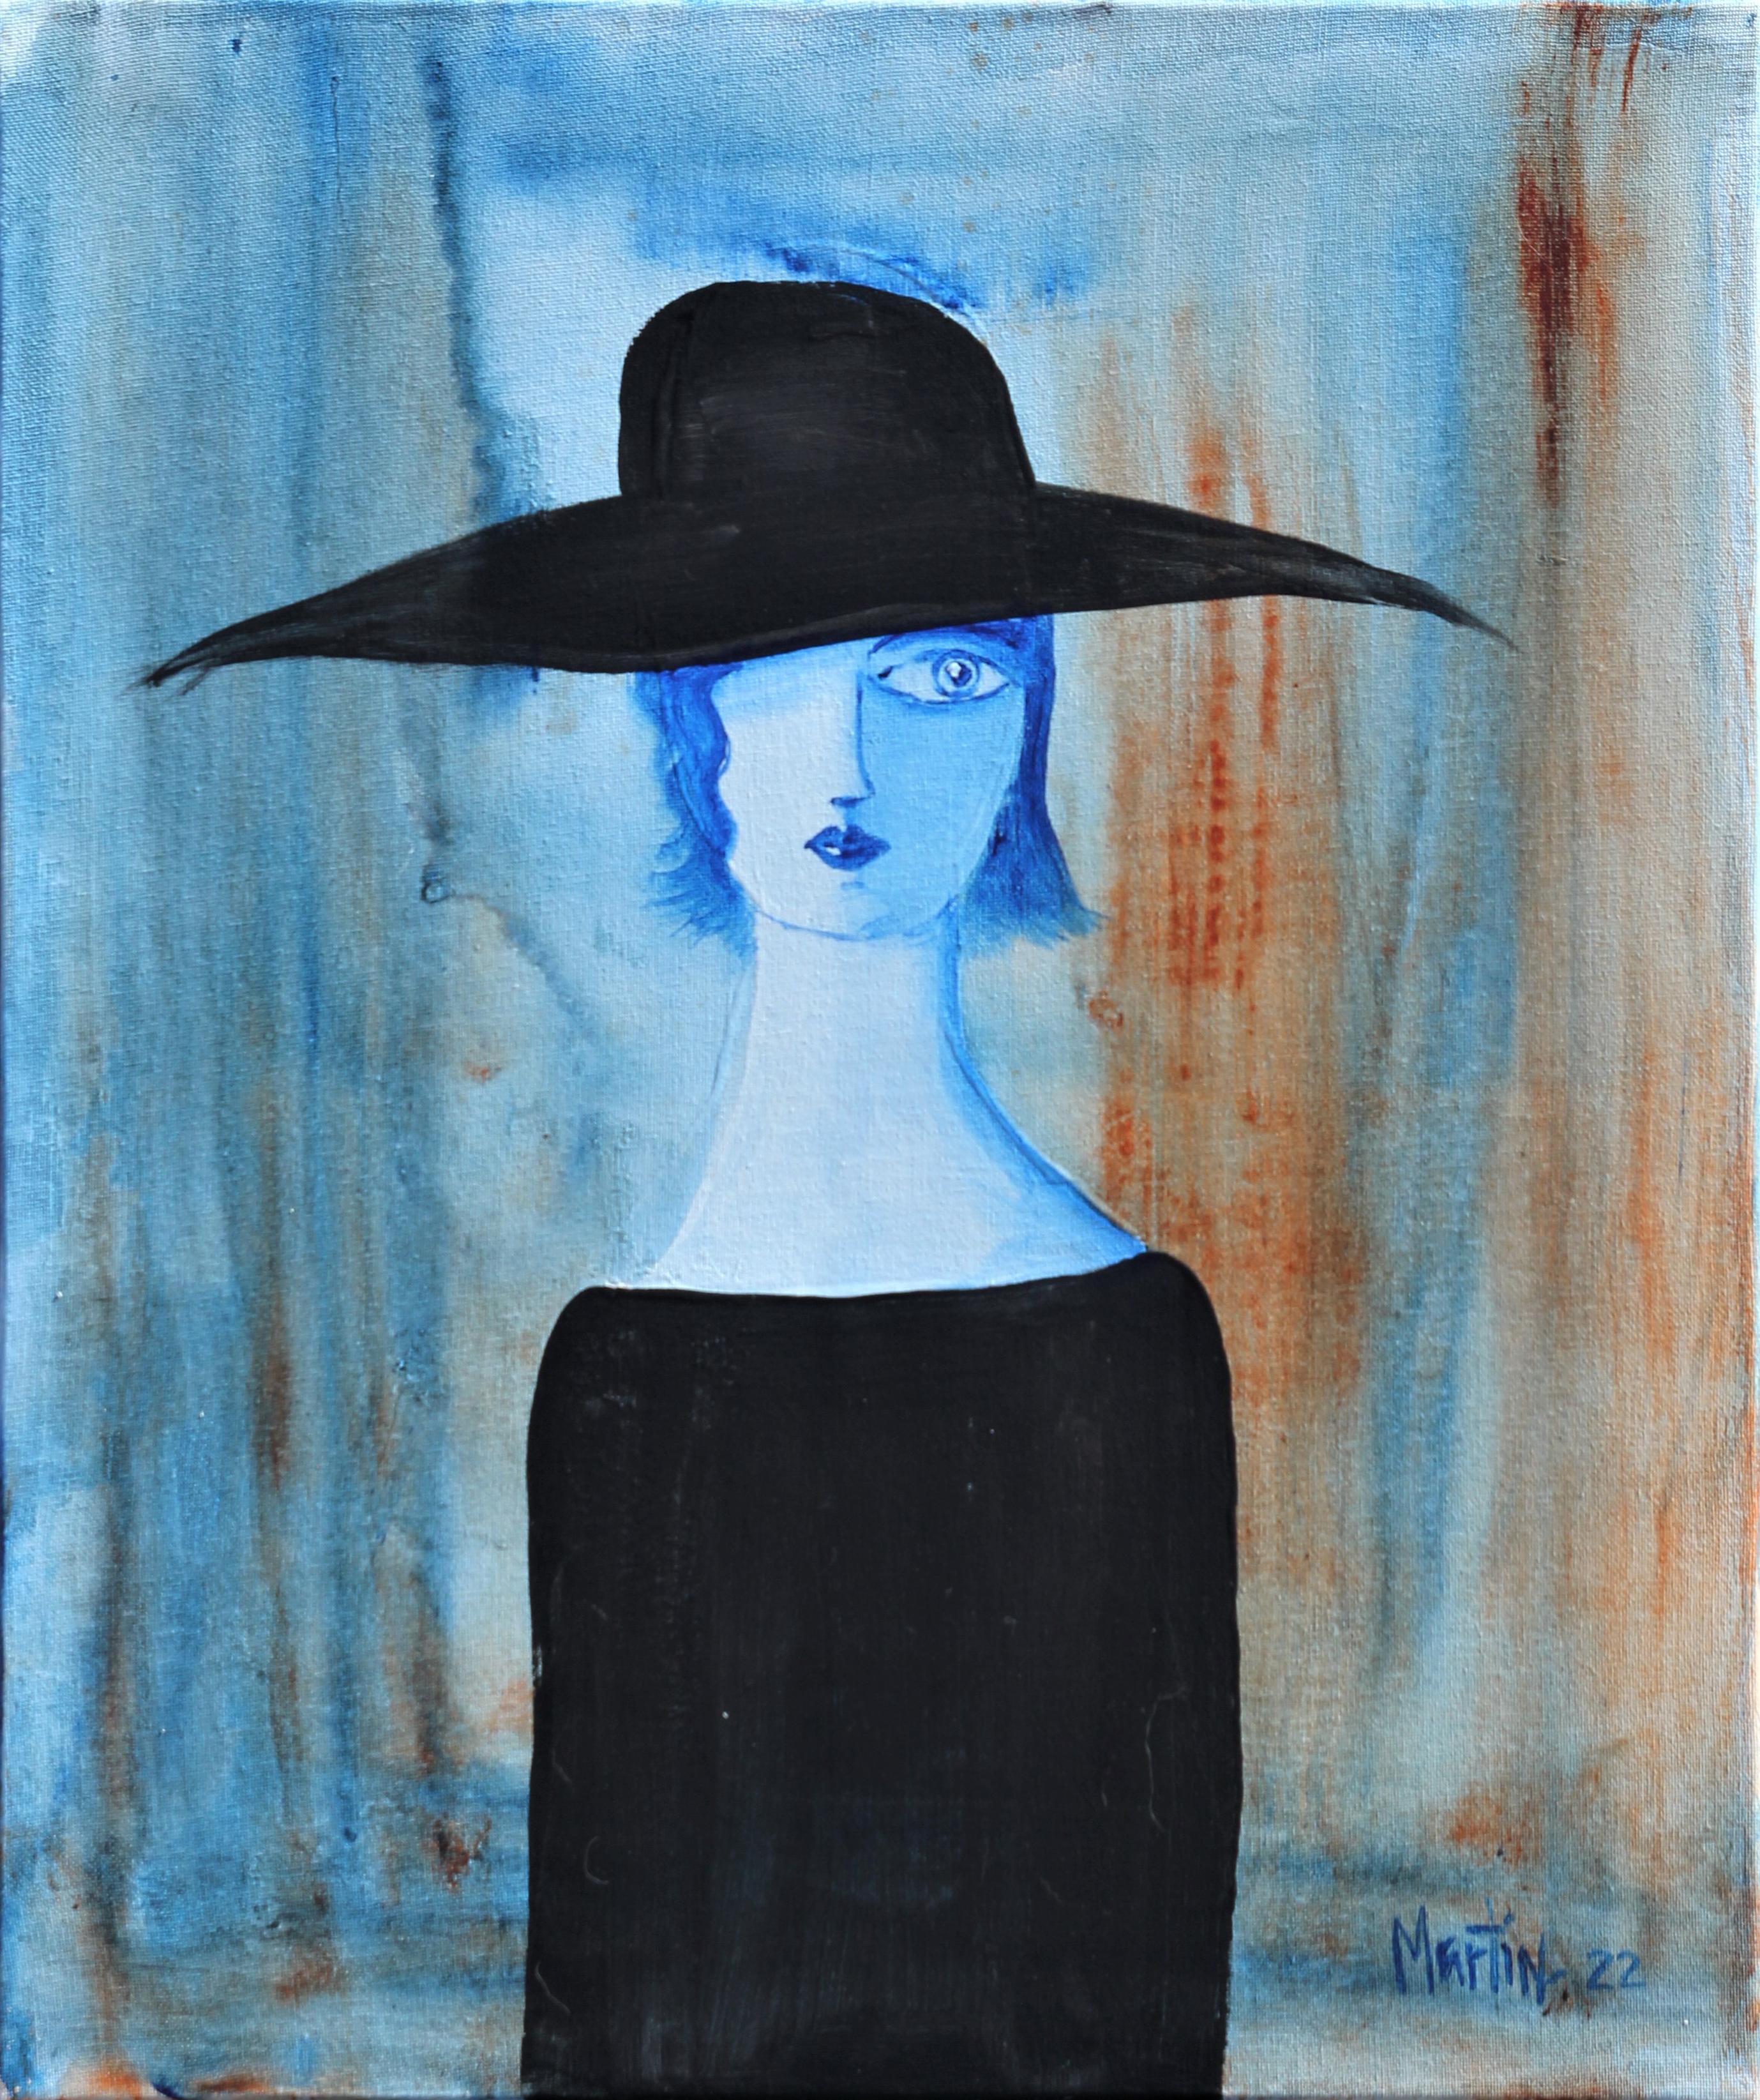 "Sybil" Blue, Orange, and Black Abstract Figurative Portrait of a Woman